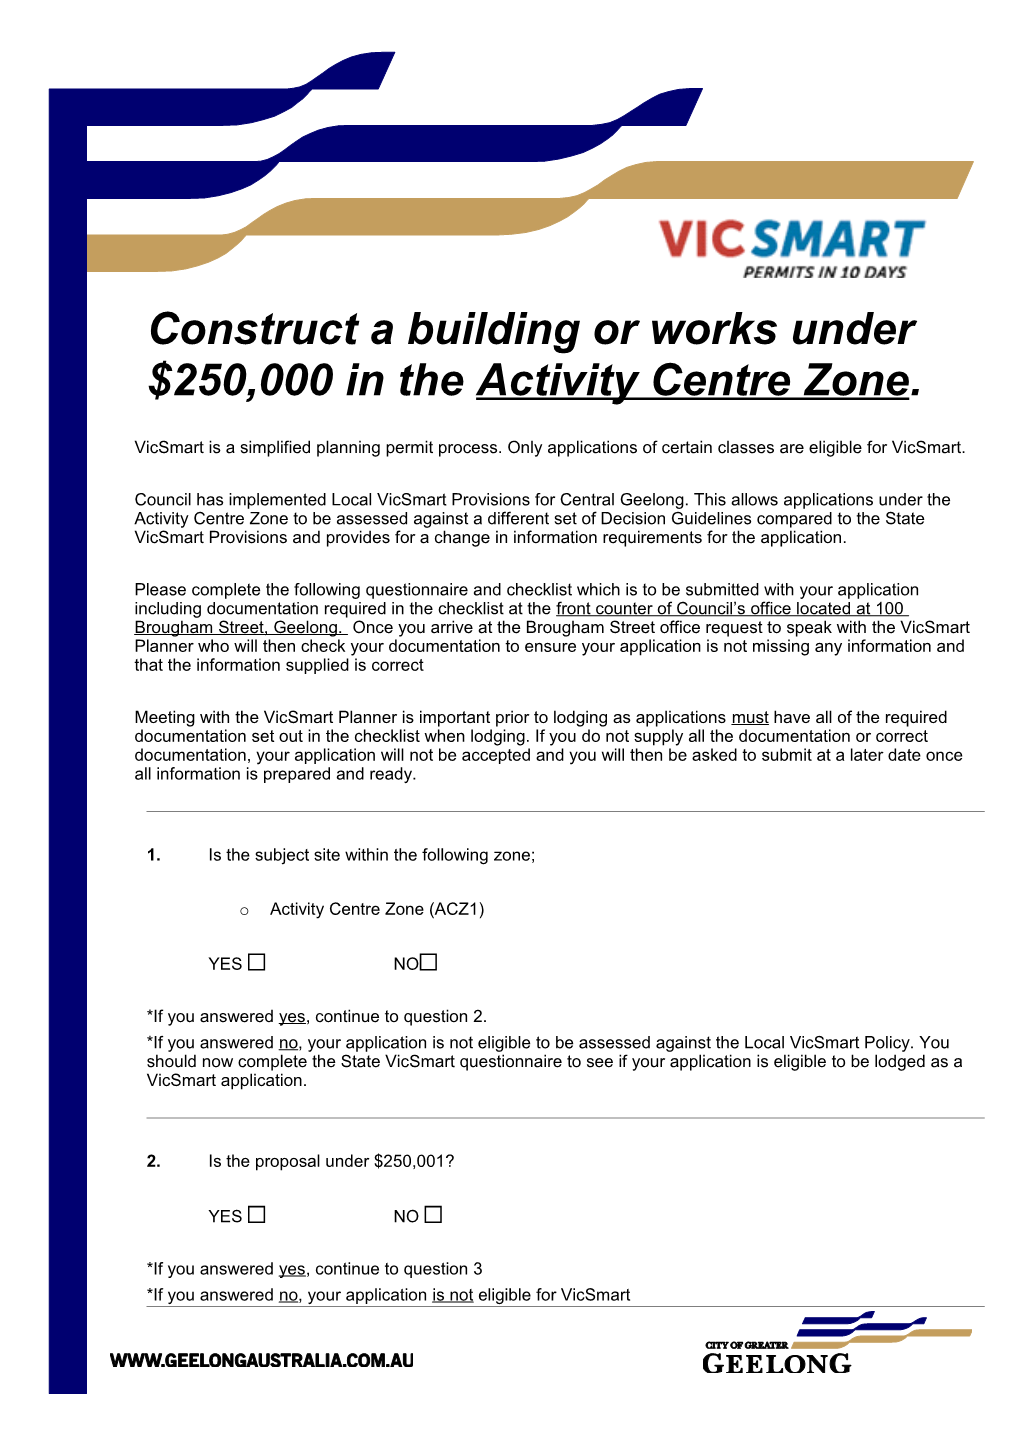 Construct a Building Or Works Under $250,000 in the Activity Centre Zone